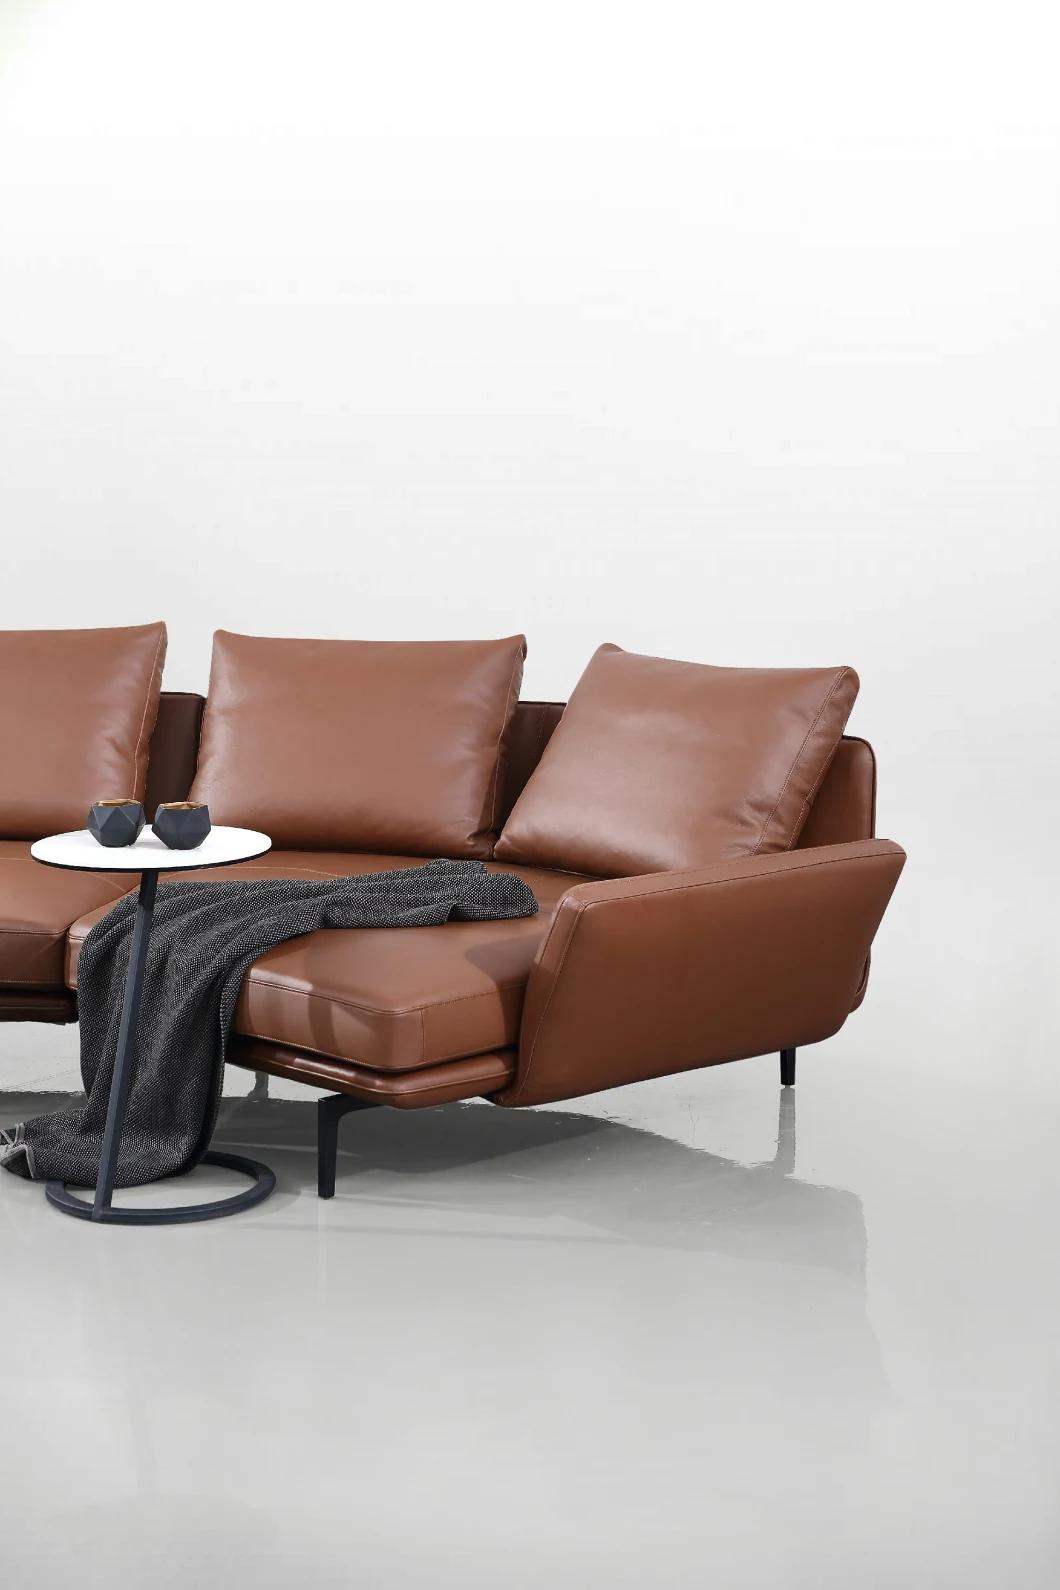 New Modern Home Furniture Multi-Functional Sectional Leather Sofa Living Room Sofa